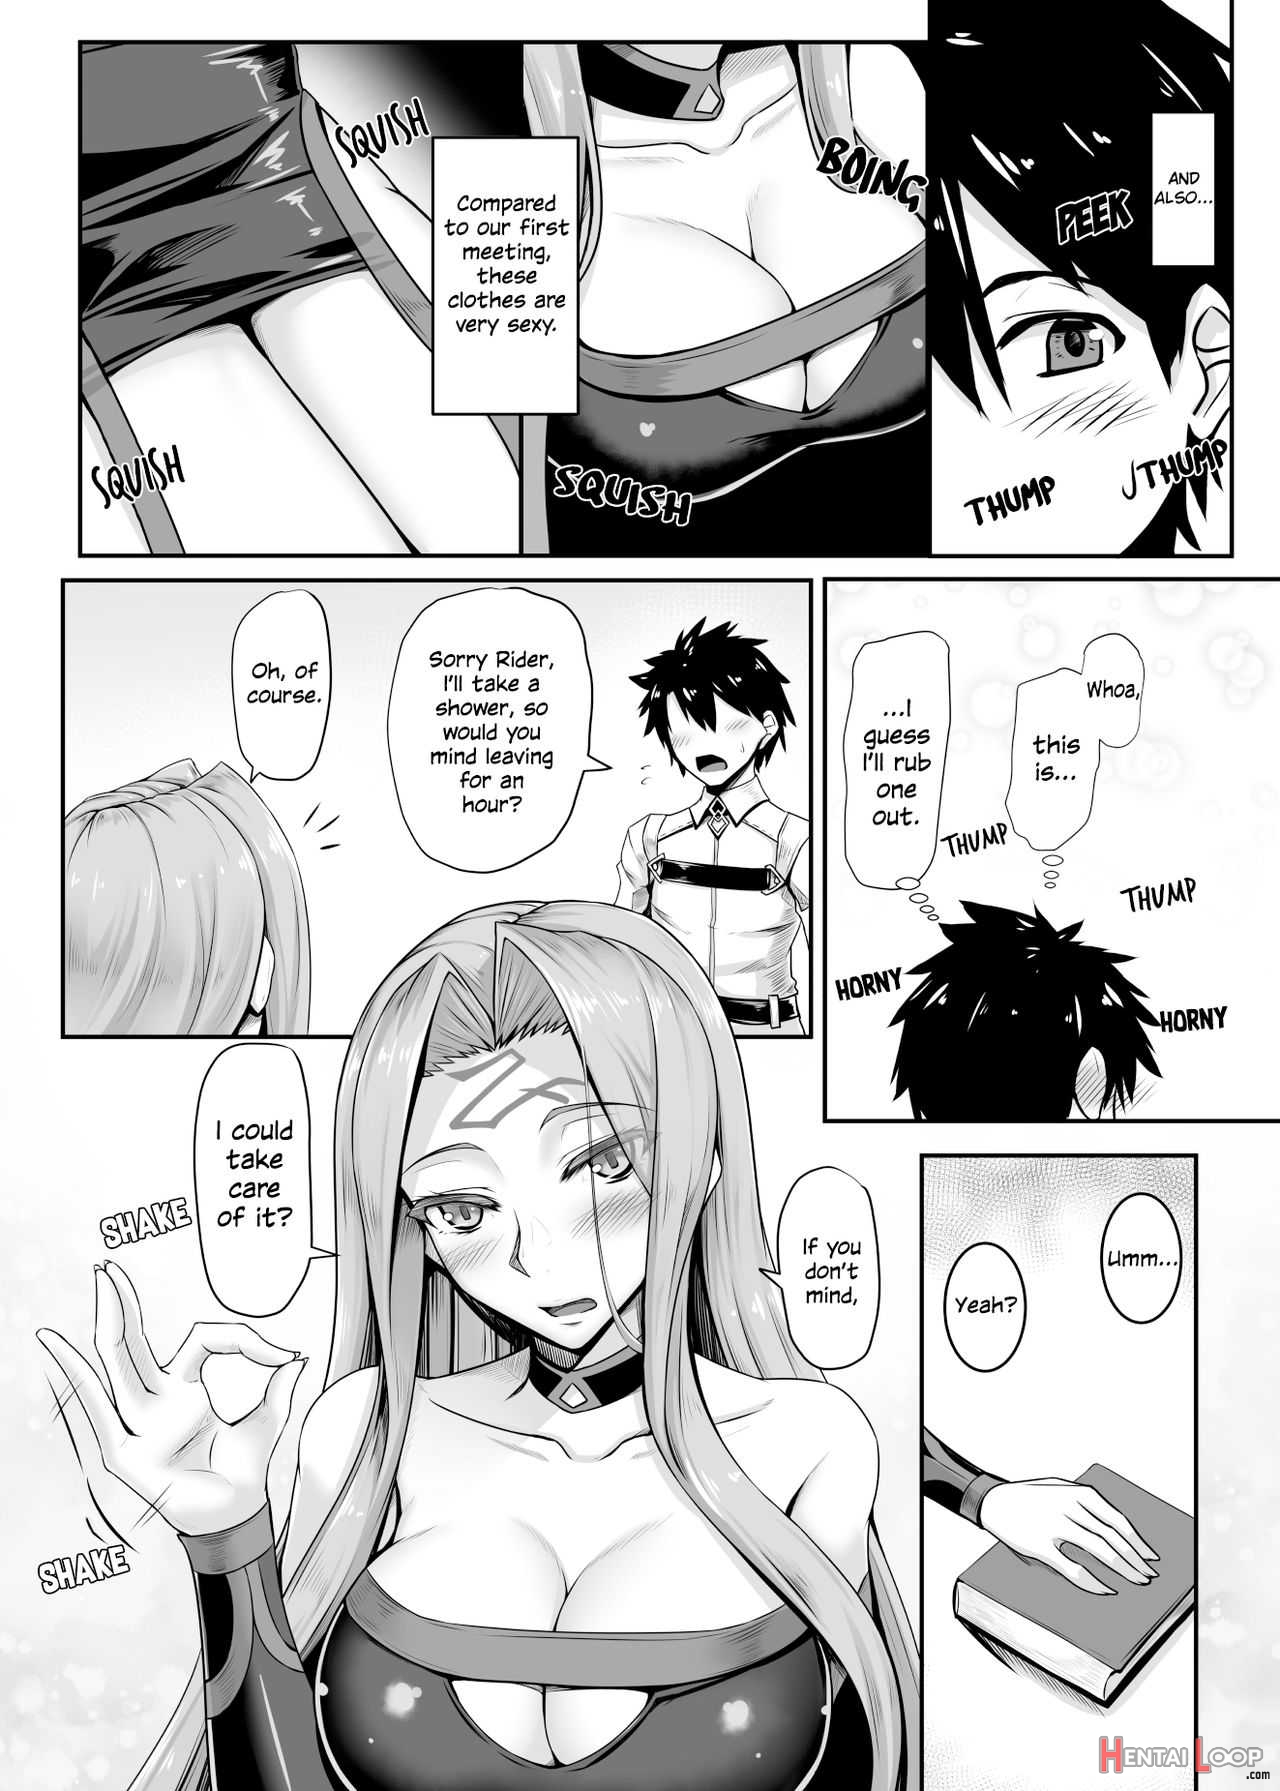 Max Bonding With Rider page 3